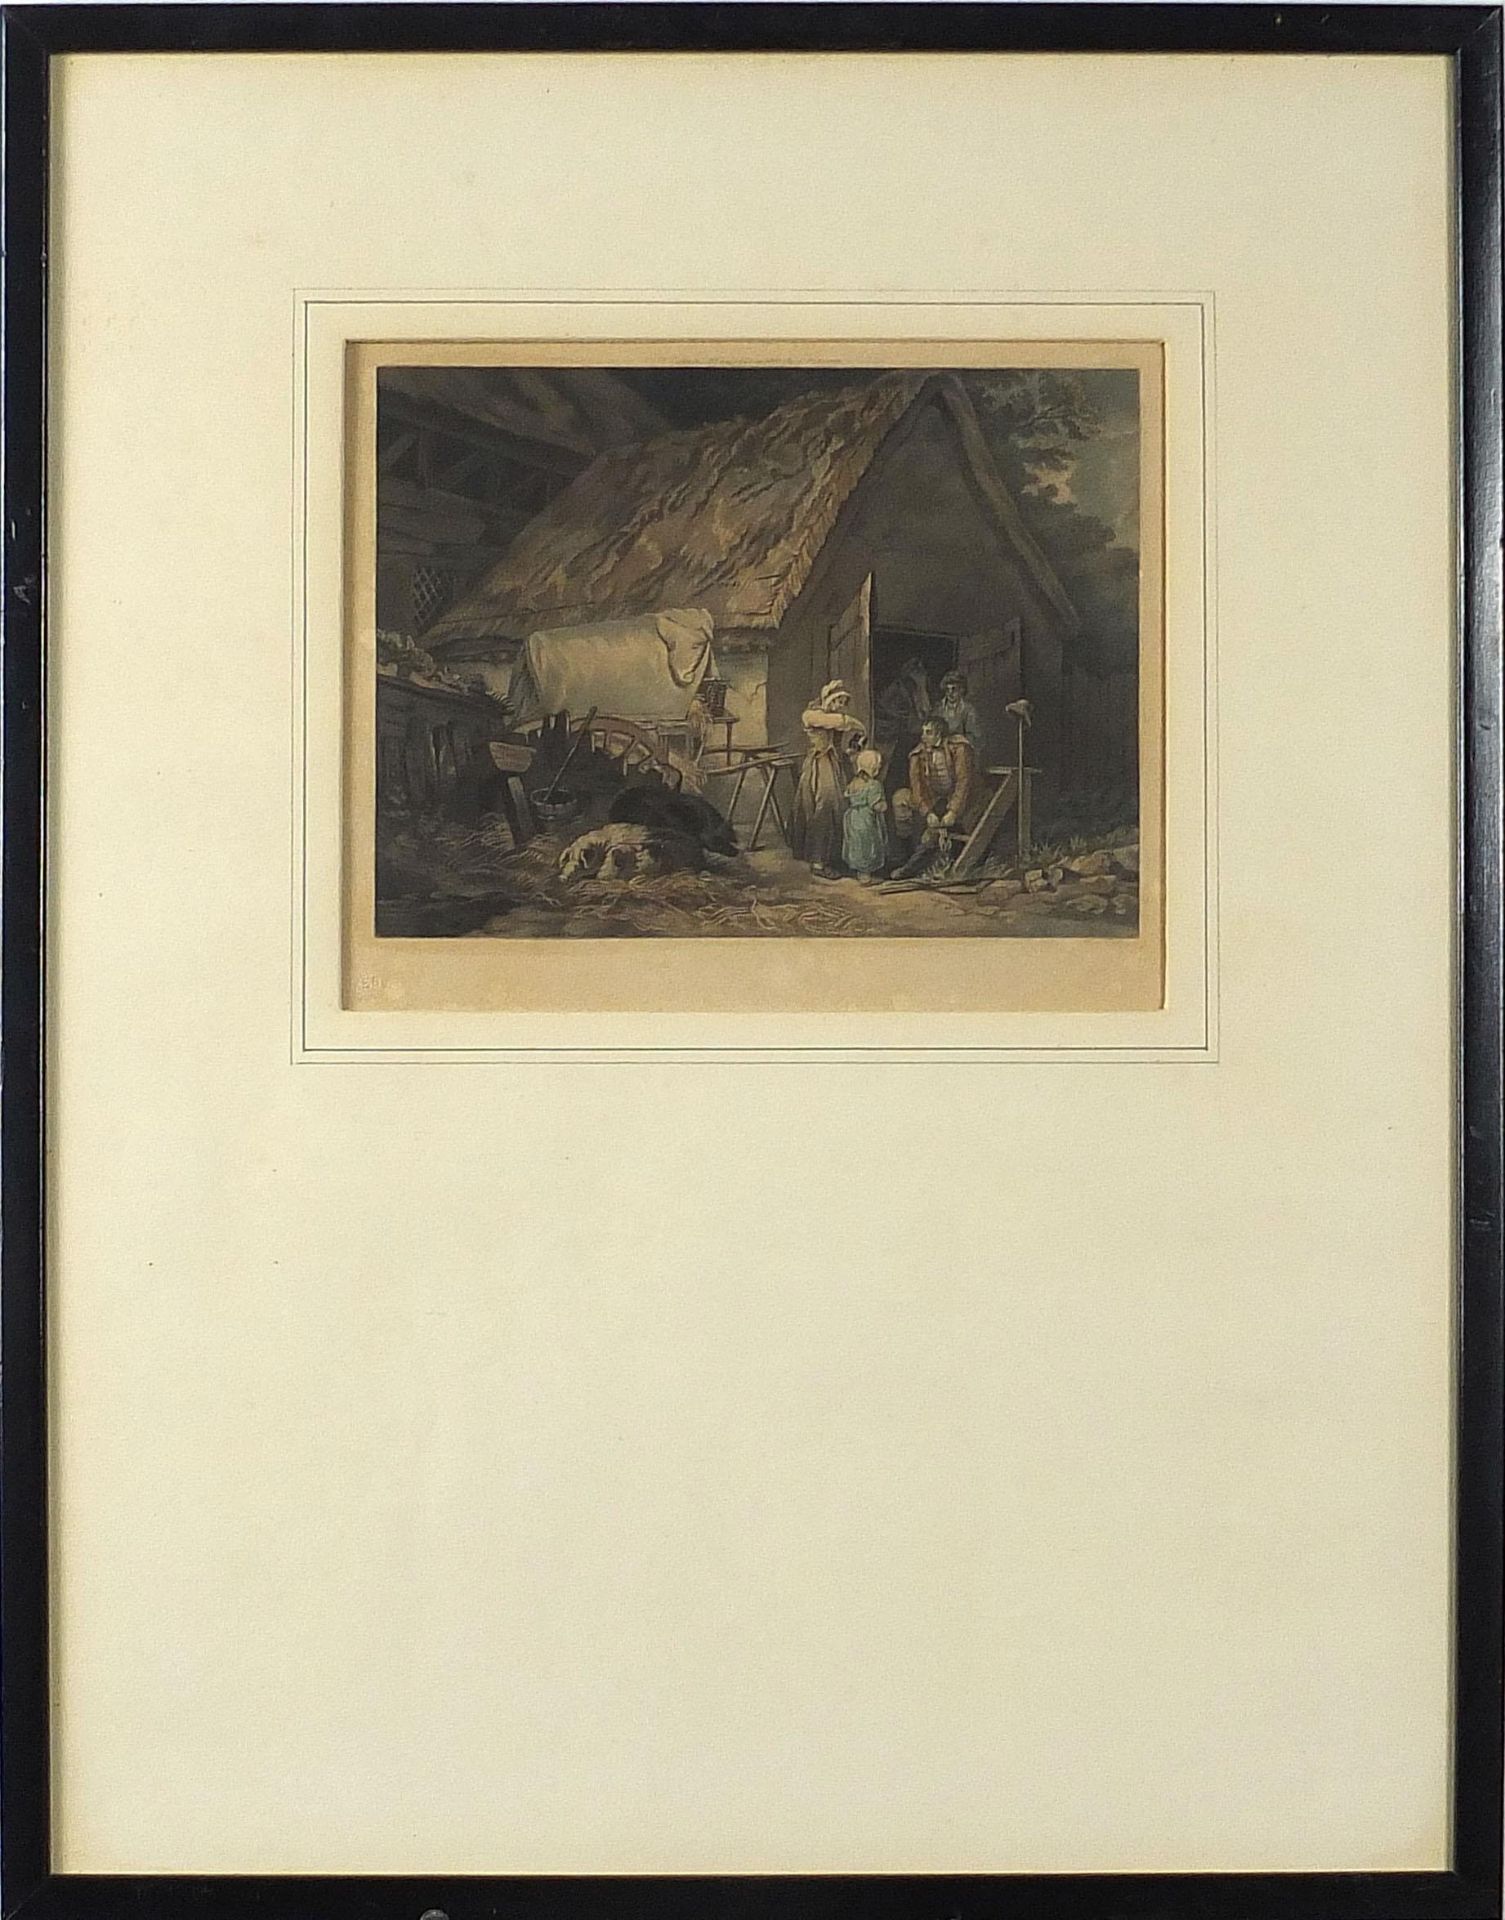 George Morland - Tarring the boat and figures before a barn, pair of prints in colour, one pencil - Image 9 of 12